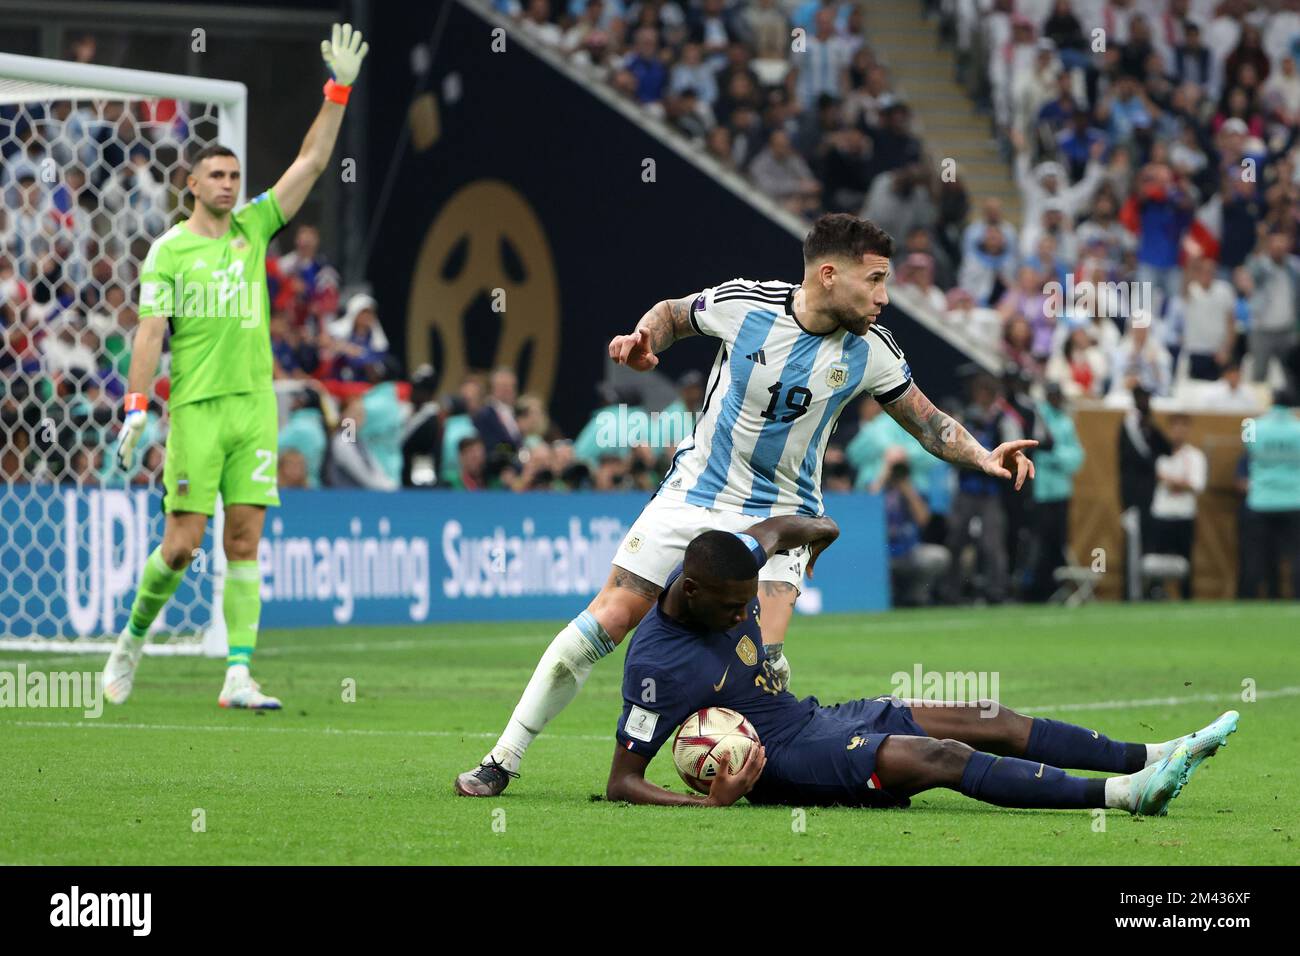 LUSAIL CITY, QATAR - DECEMBER 18: Kylian Mbappe of France in action against Nicolas Otamendi of Argentina during the FIFA World Cup Qatar 2022 Final match between Argentina and France at Lusail Stadium on December 18, 2022 in Lusail City, Qatar. Photo: Goran Stanzl/PIXSELL Stock Photo